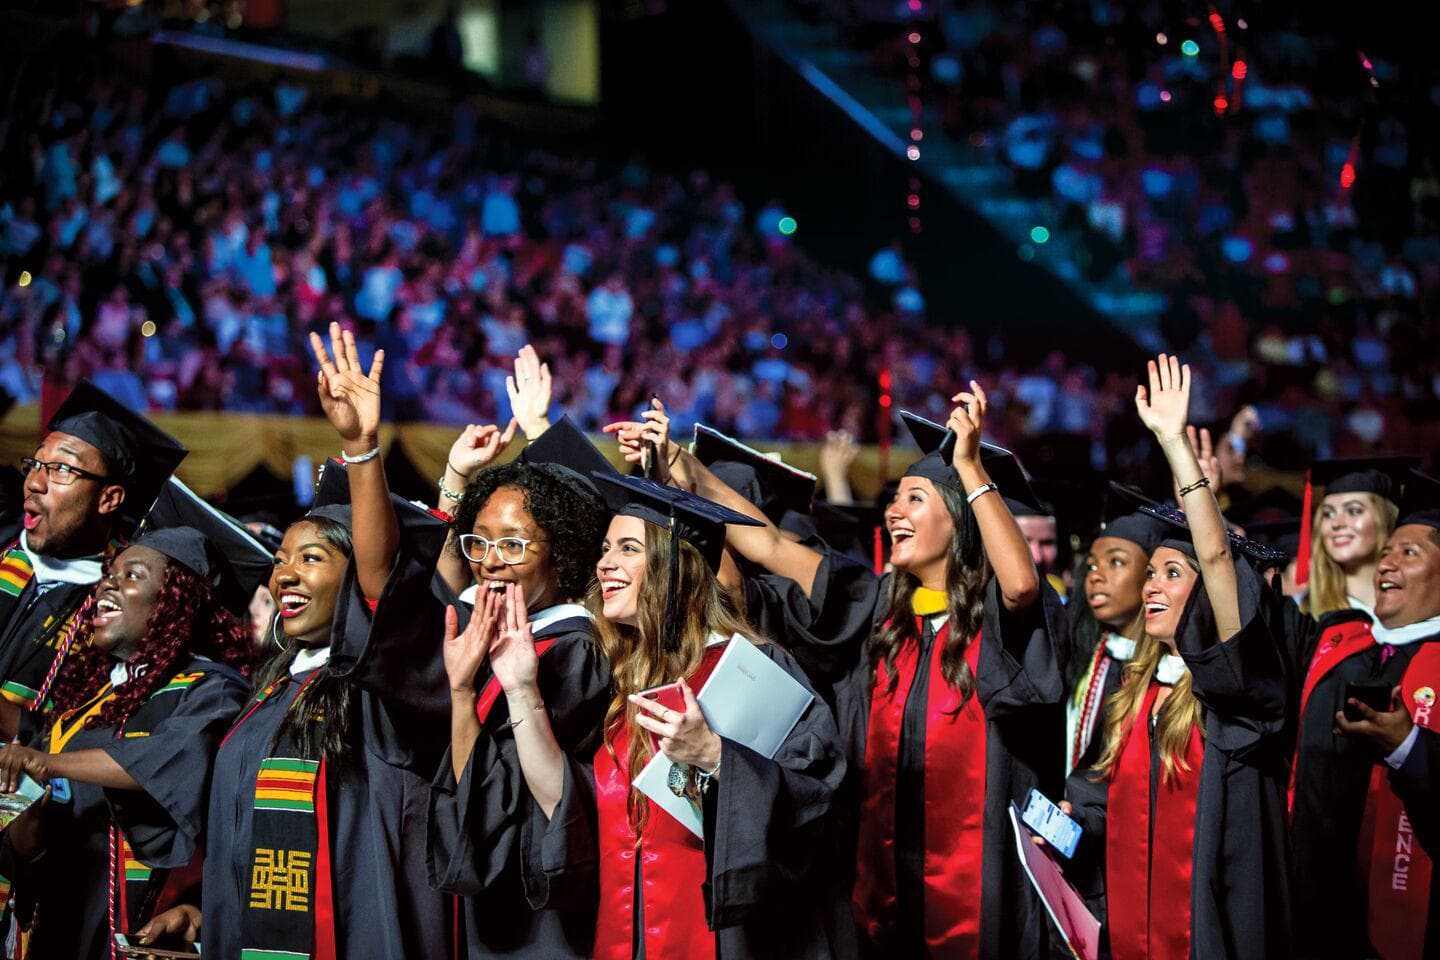 A diverse group of students in caps and gowns celebrates commencement.